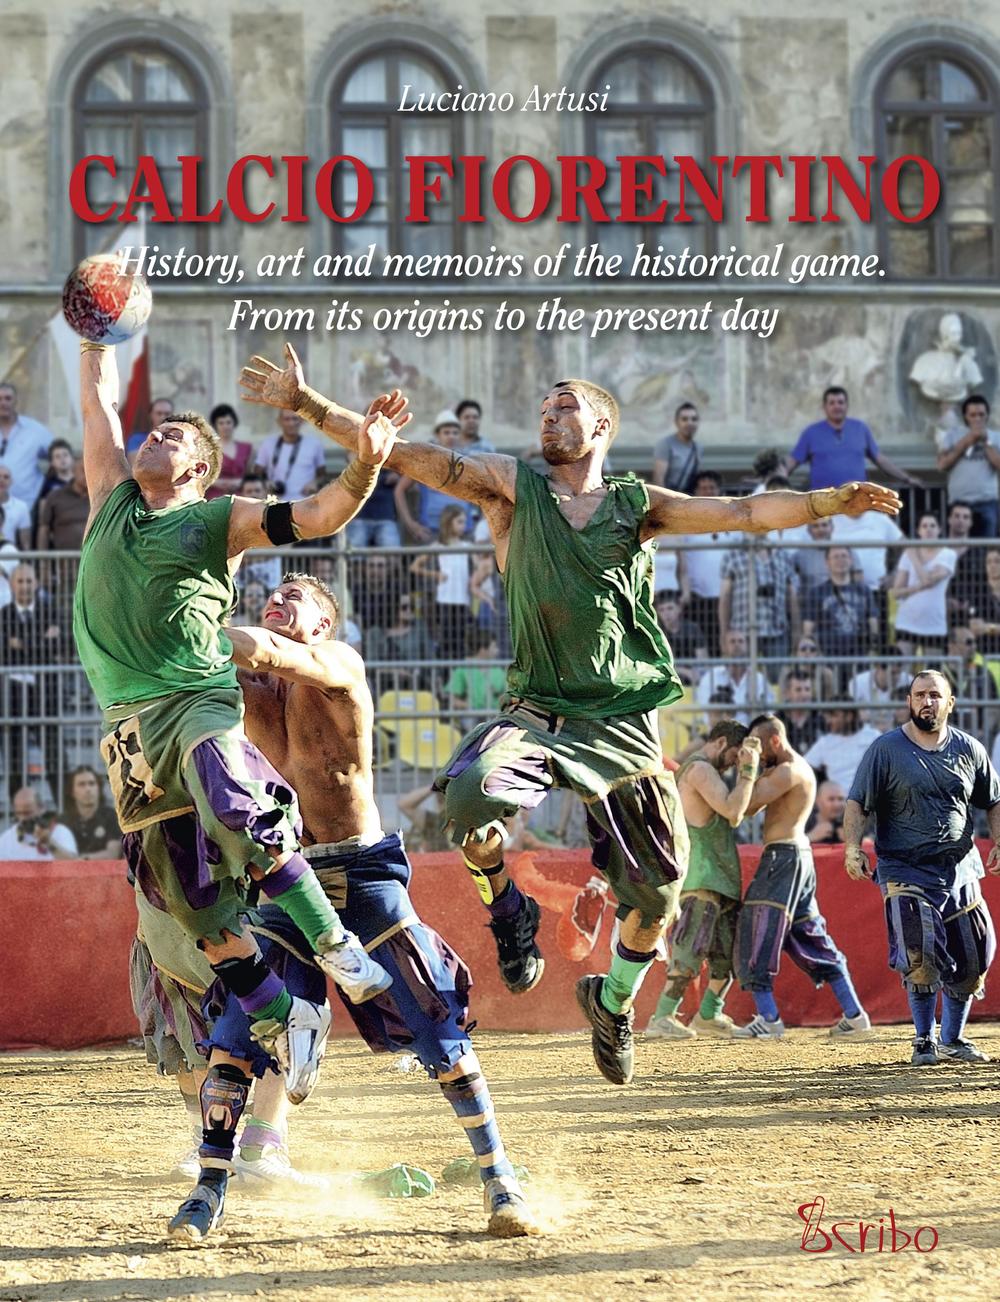 Calcio fiorentino. History, art and memoirs of the historical game. From its origins to the present day. Ediz. inglese